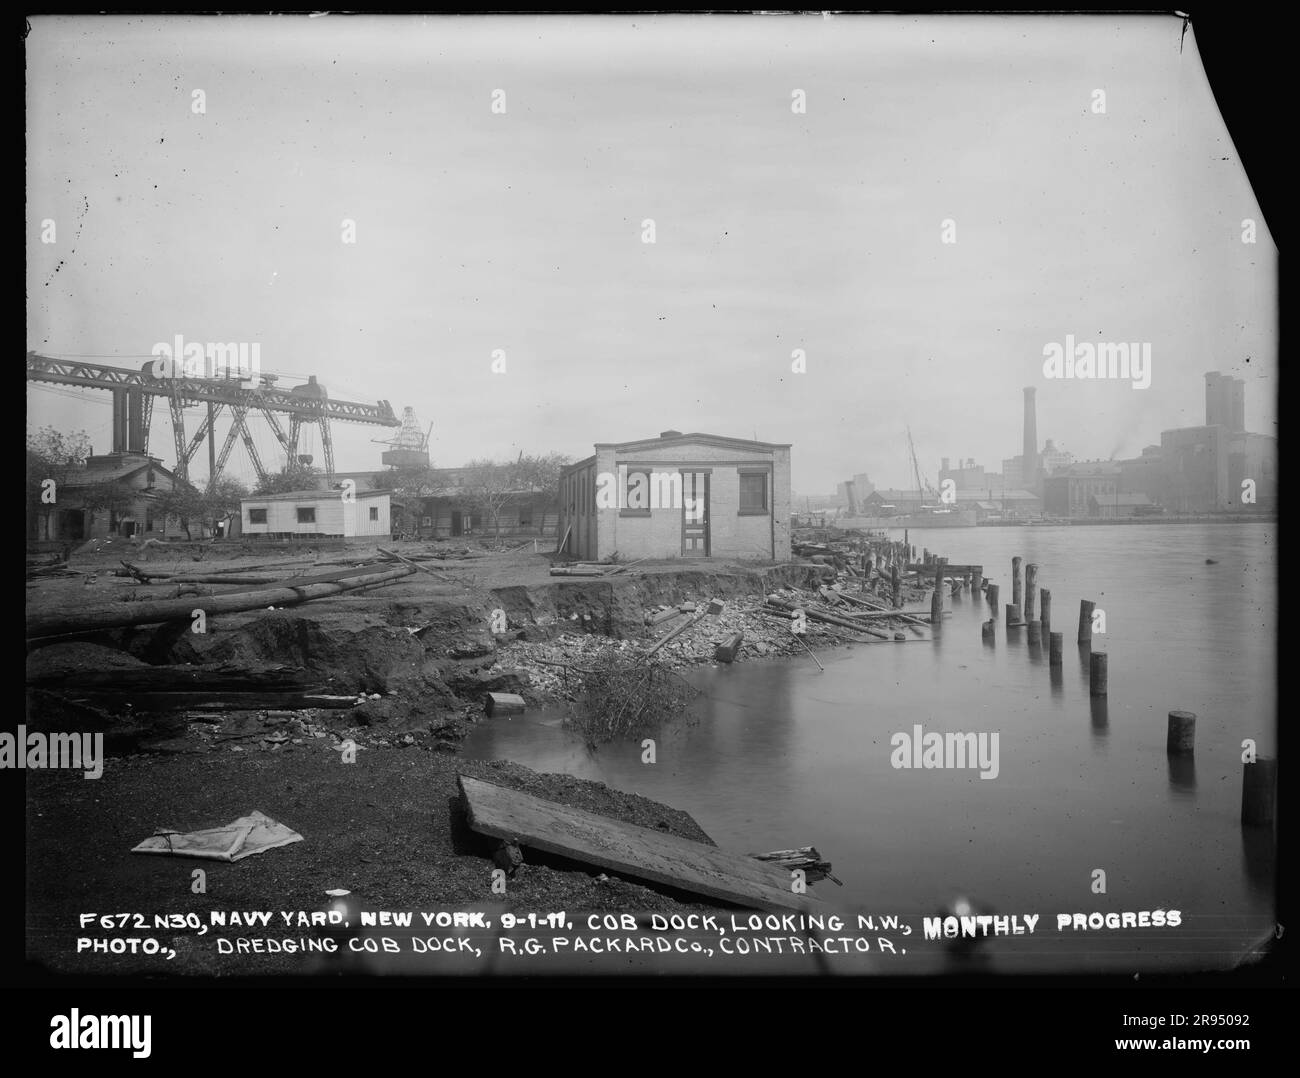 Cob Dock, Looking Northwest, Monthly Progress Photo, Dredging Cob Dock, R. G. Packard Company, Contractor. Glass Plate Negatives of the Construction and Repair of Buildings, Facilities, and Vessels at the New York Navy Yard. Stock Photo